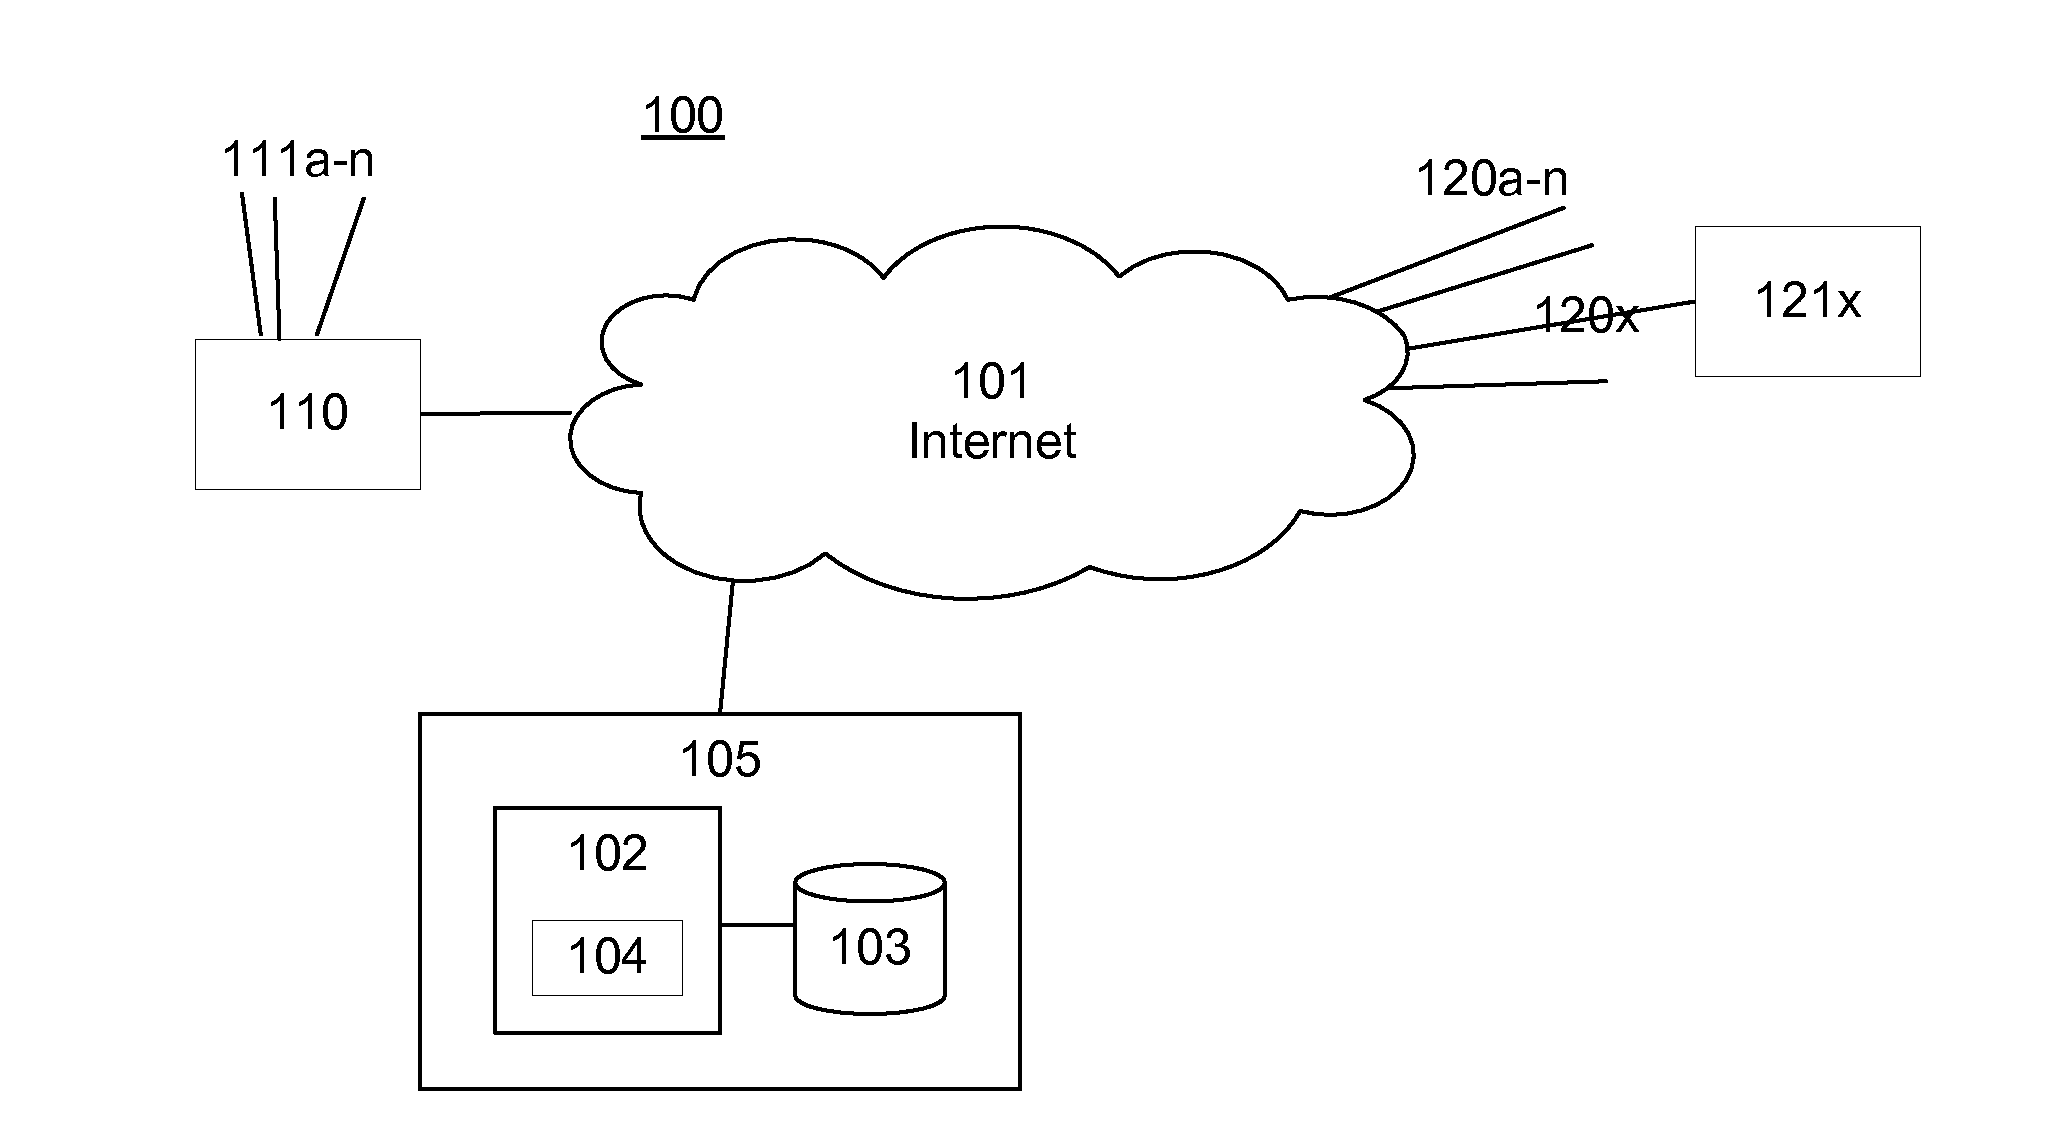 Enhanced Automated Capture of Invoices into an Electronic Payment System